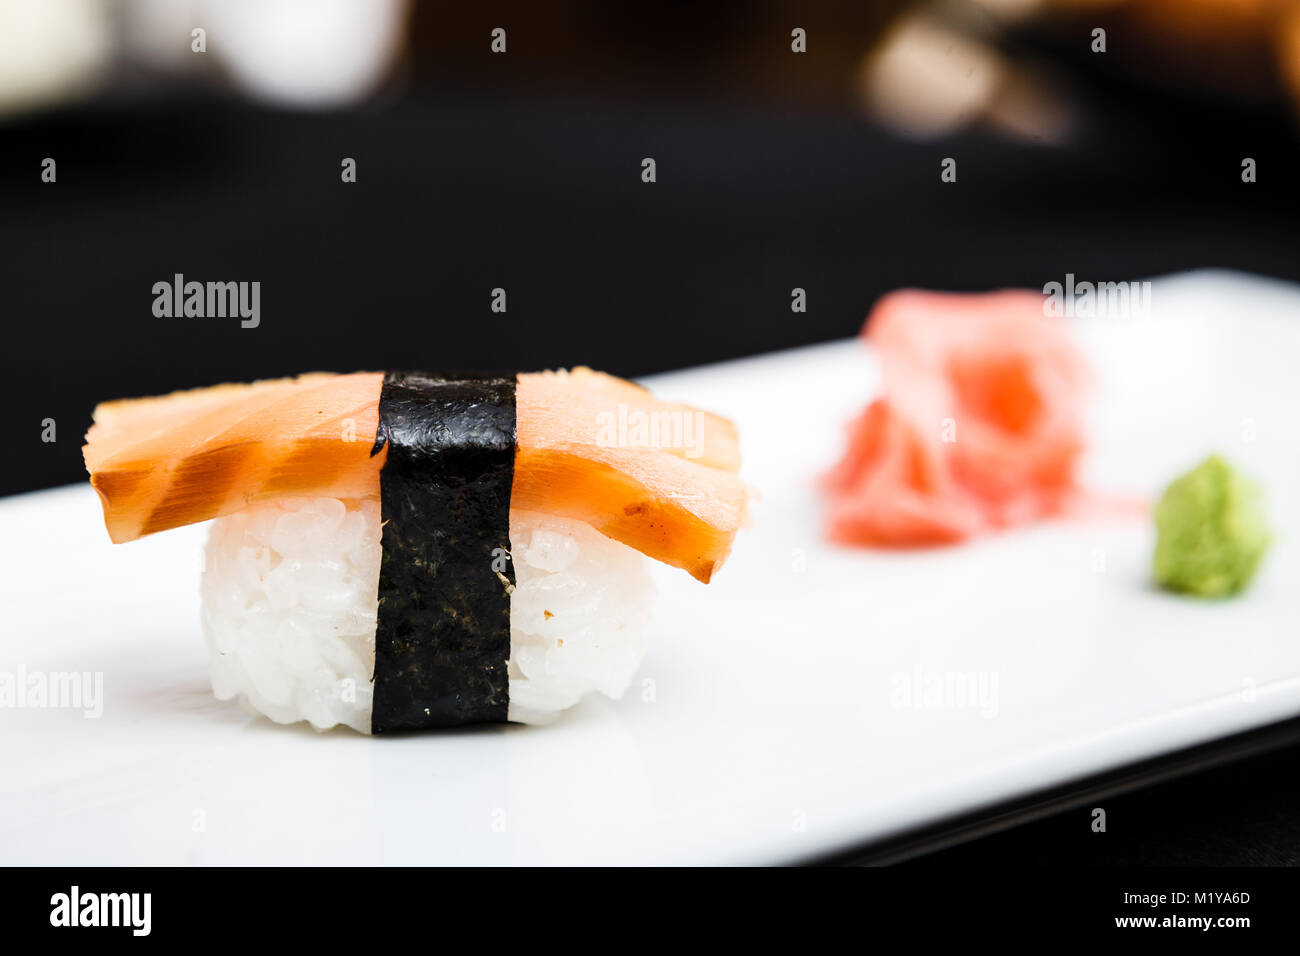 Smoked salmon sushi served on a plate Stock Photo